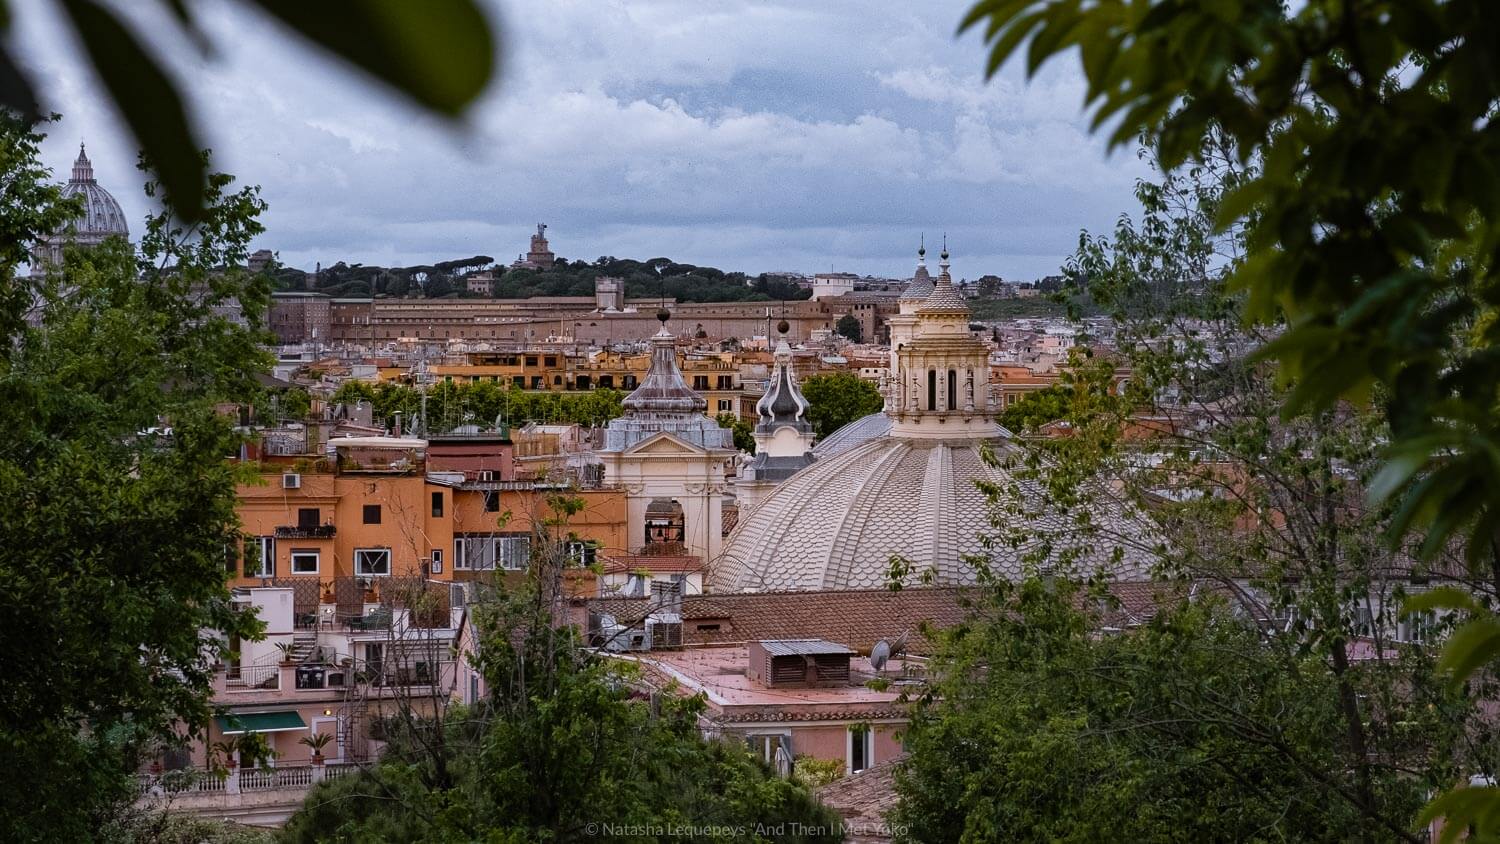 Views of the city from the Borghese Park in Rome, Italy. Travel photography and guide by © Natasha Lequepeys for "And Then I Met Yoko". #rome #italy #travelblog #travelphotography